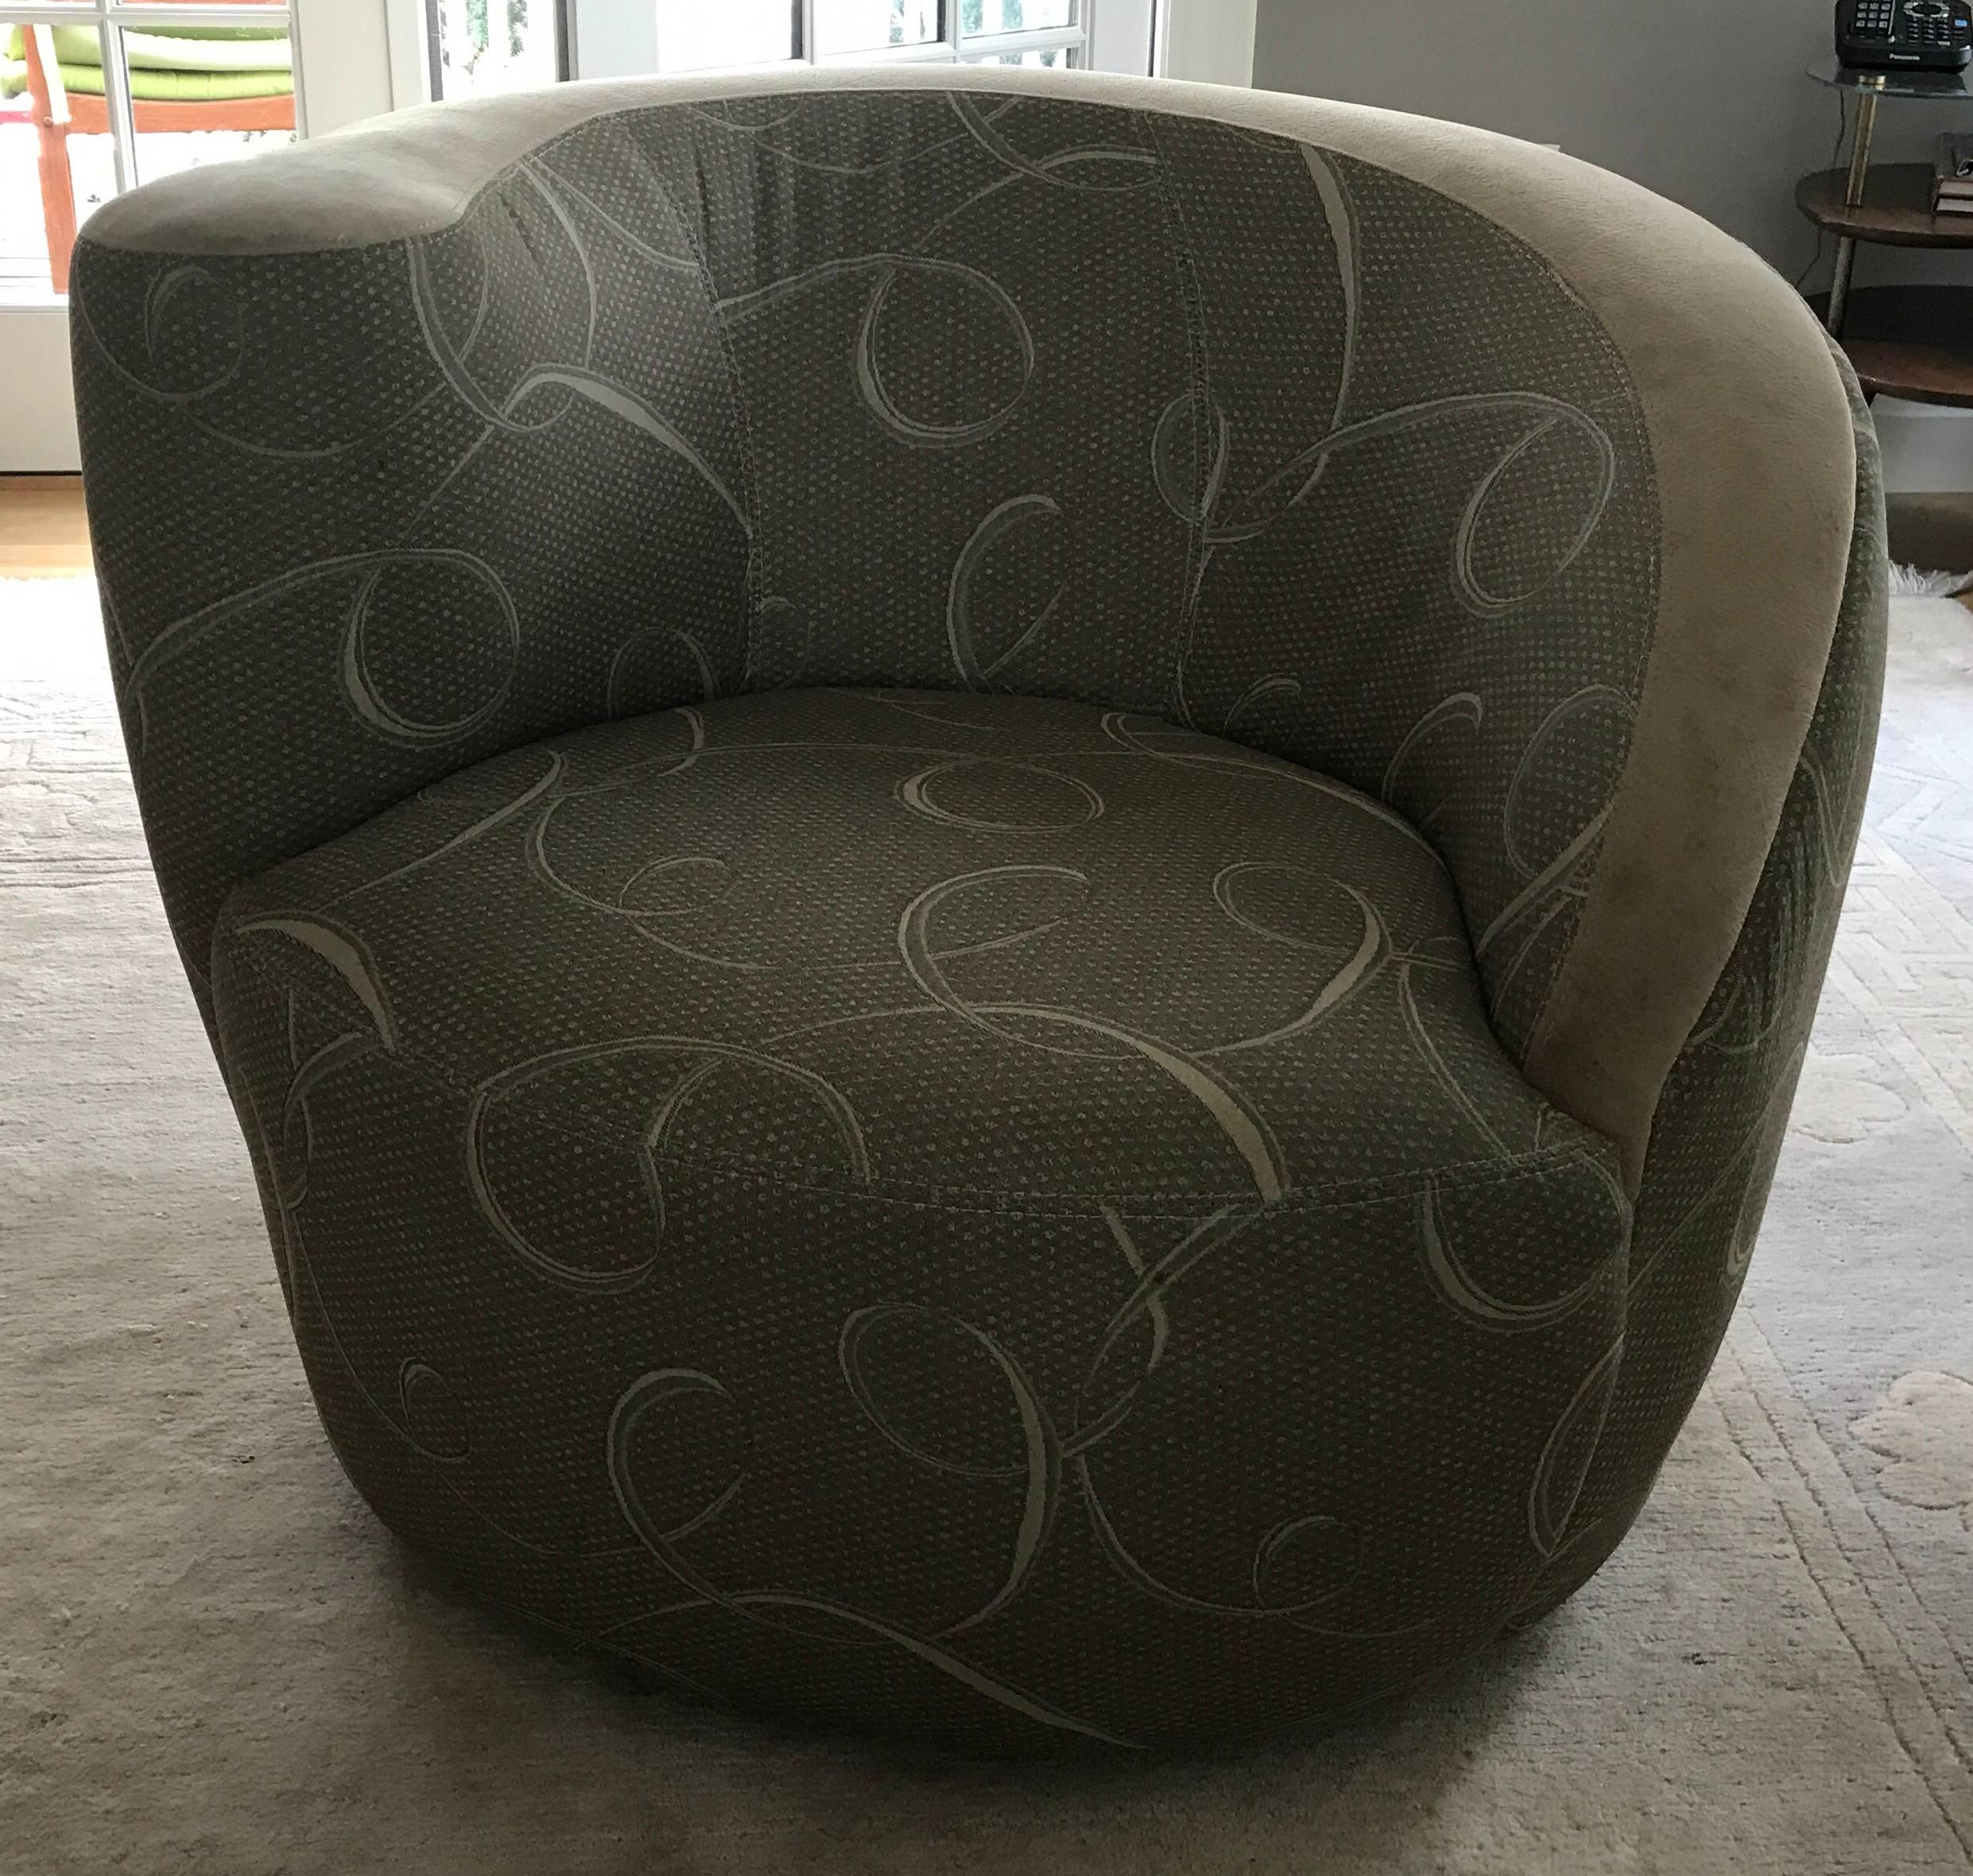 Pair of lounge chairs in beige and taupe fabric. In good but used condition.
  